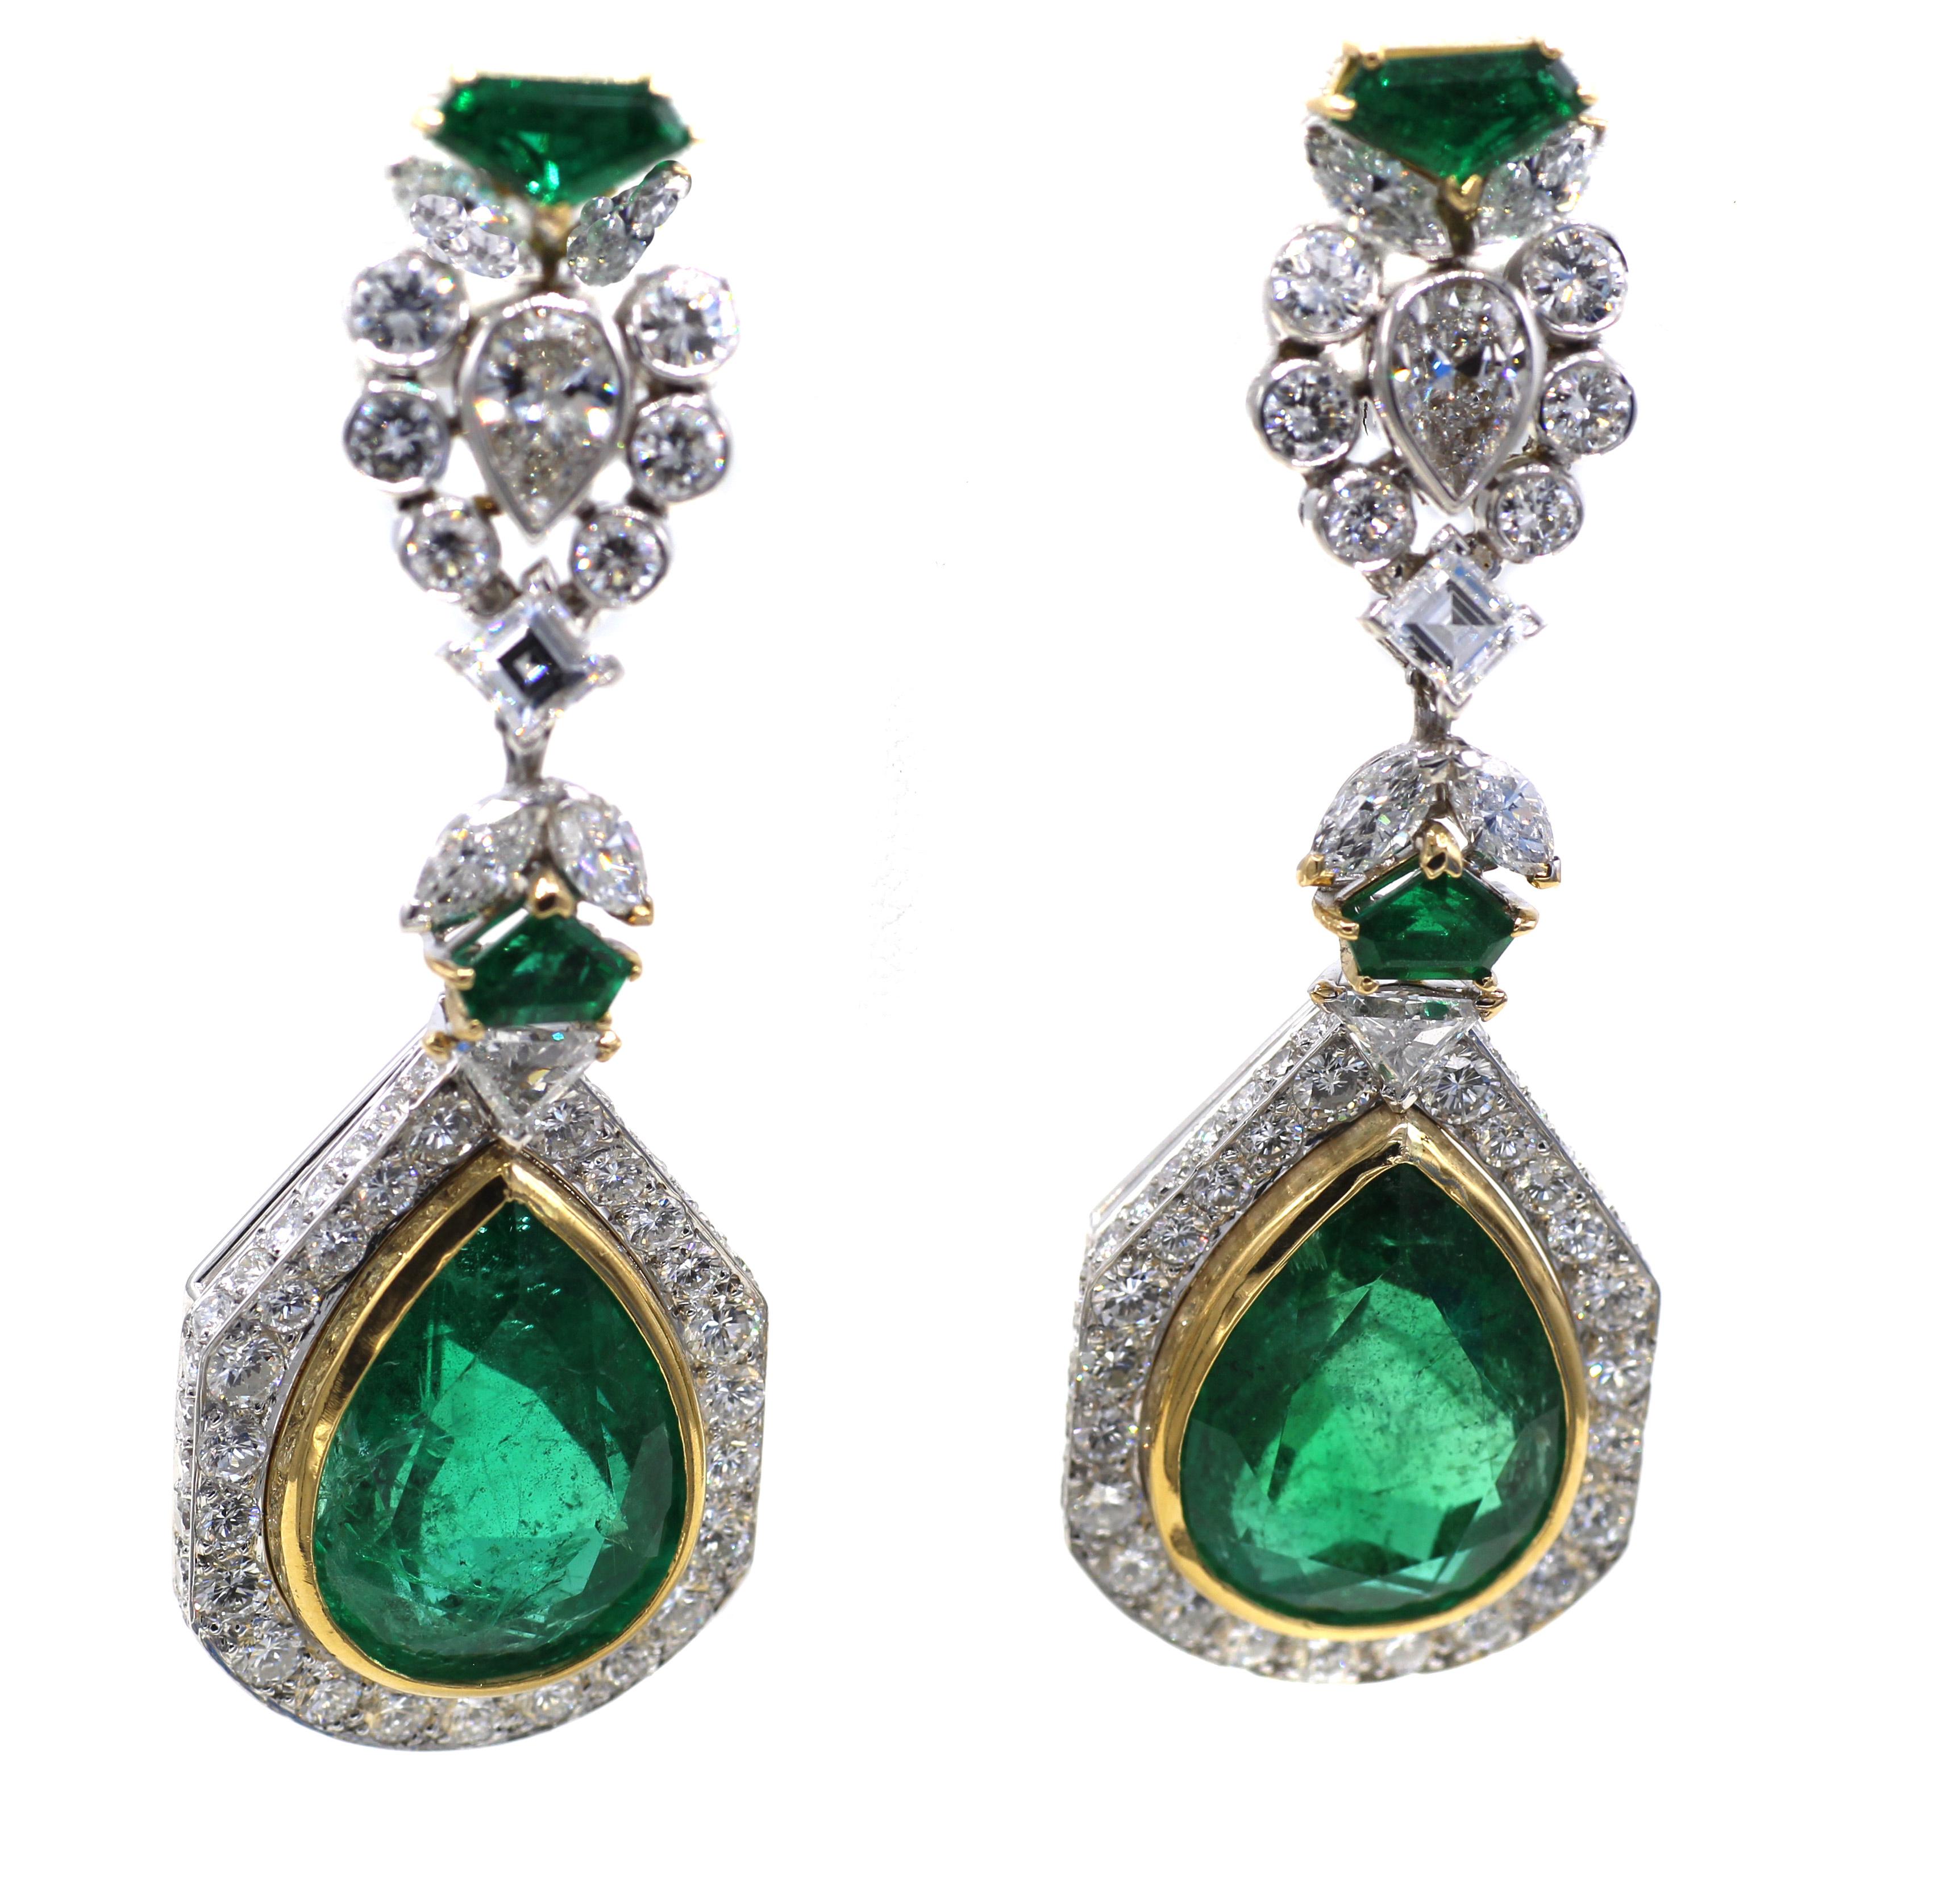 Beautifully designed and masterfully handcrafted these French 18 karat gold ear pendants feature 2 perfectly matched deep forest green pear shape emeralds weighing 14.15 carats and 14.19 carats set in a bezel of yellow gold and surrounded by bright